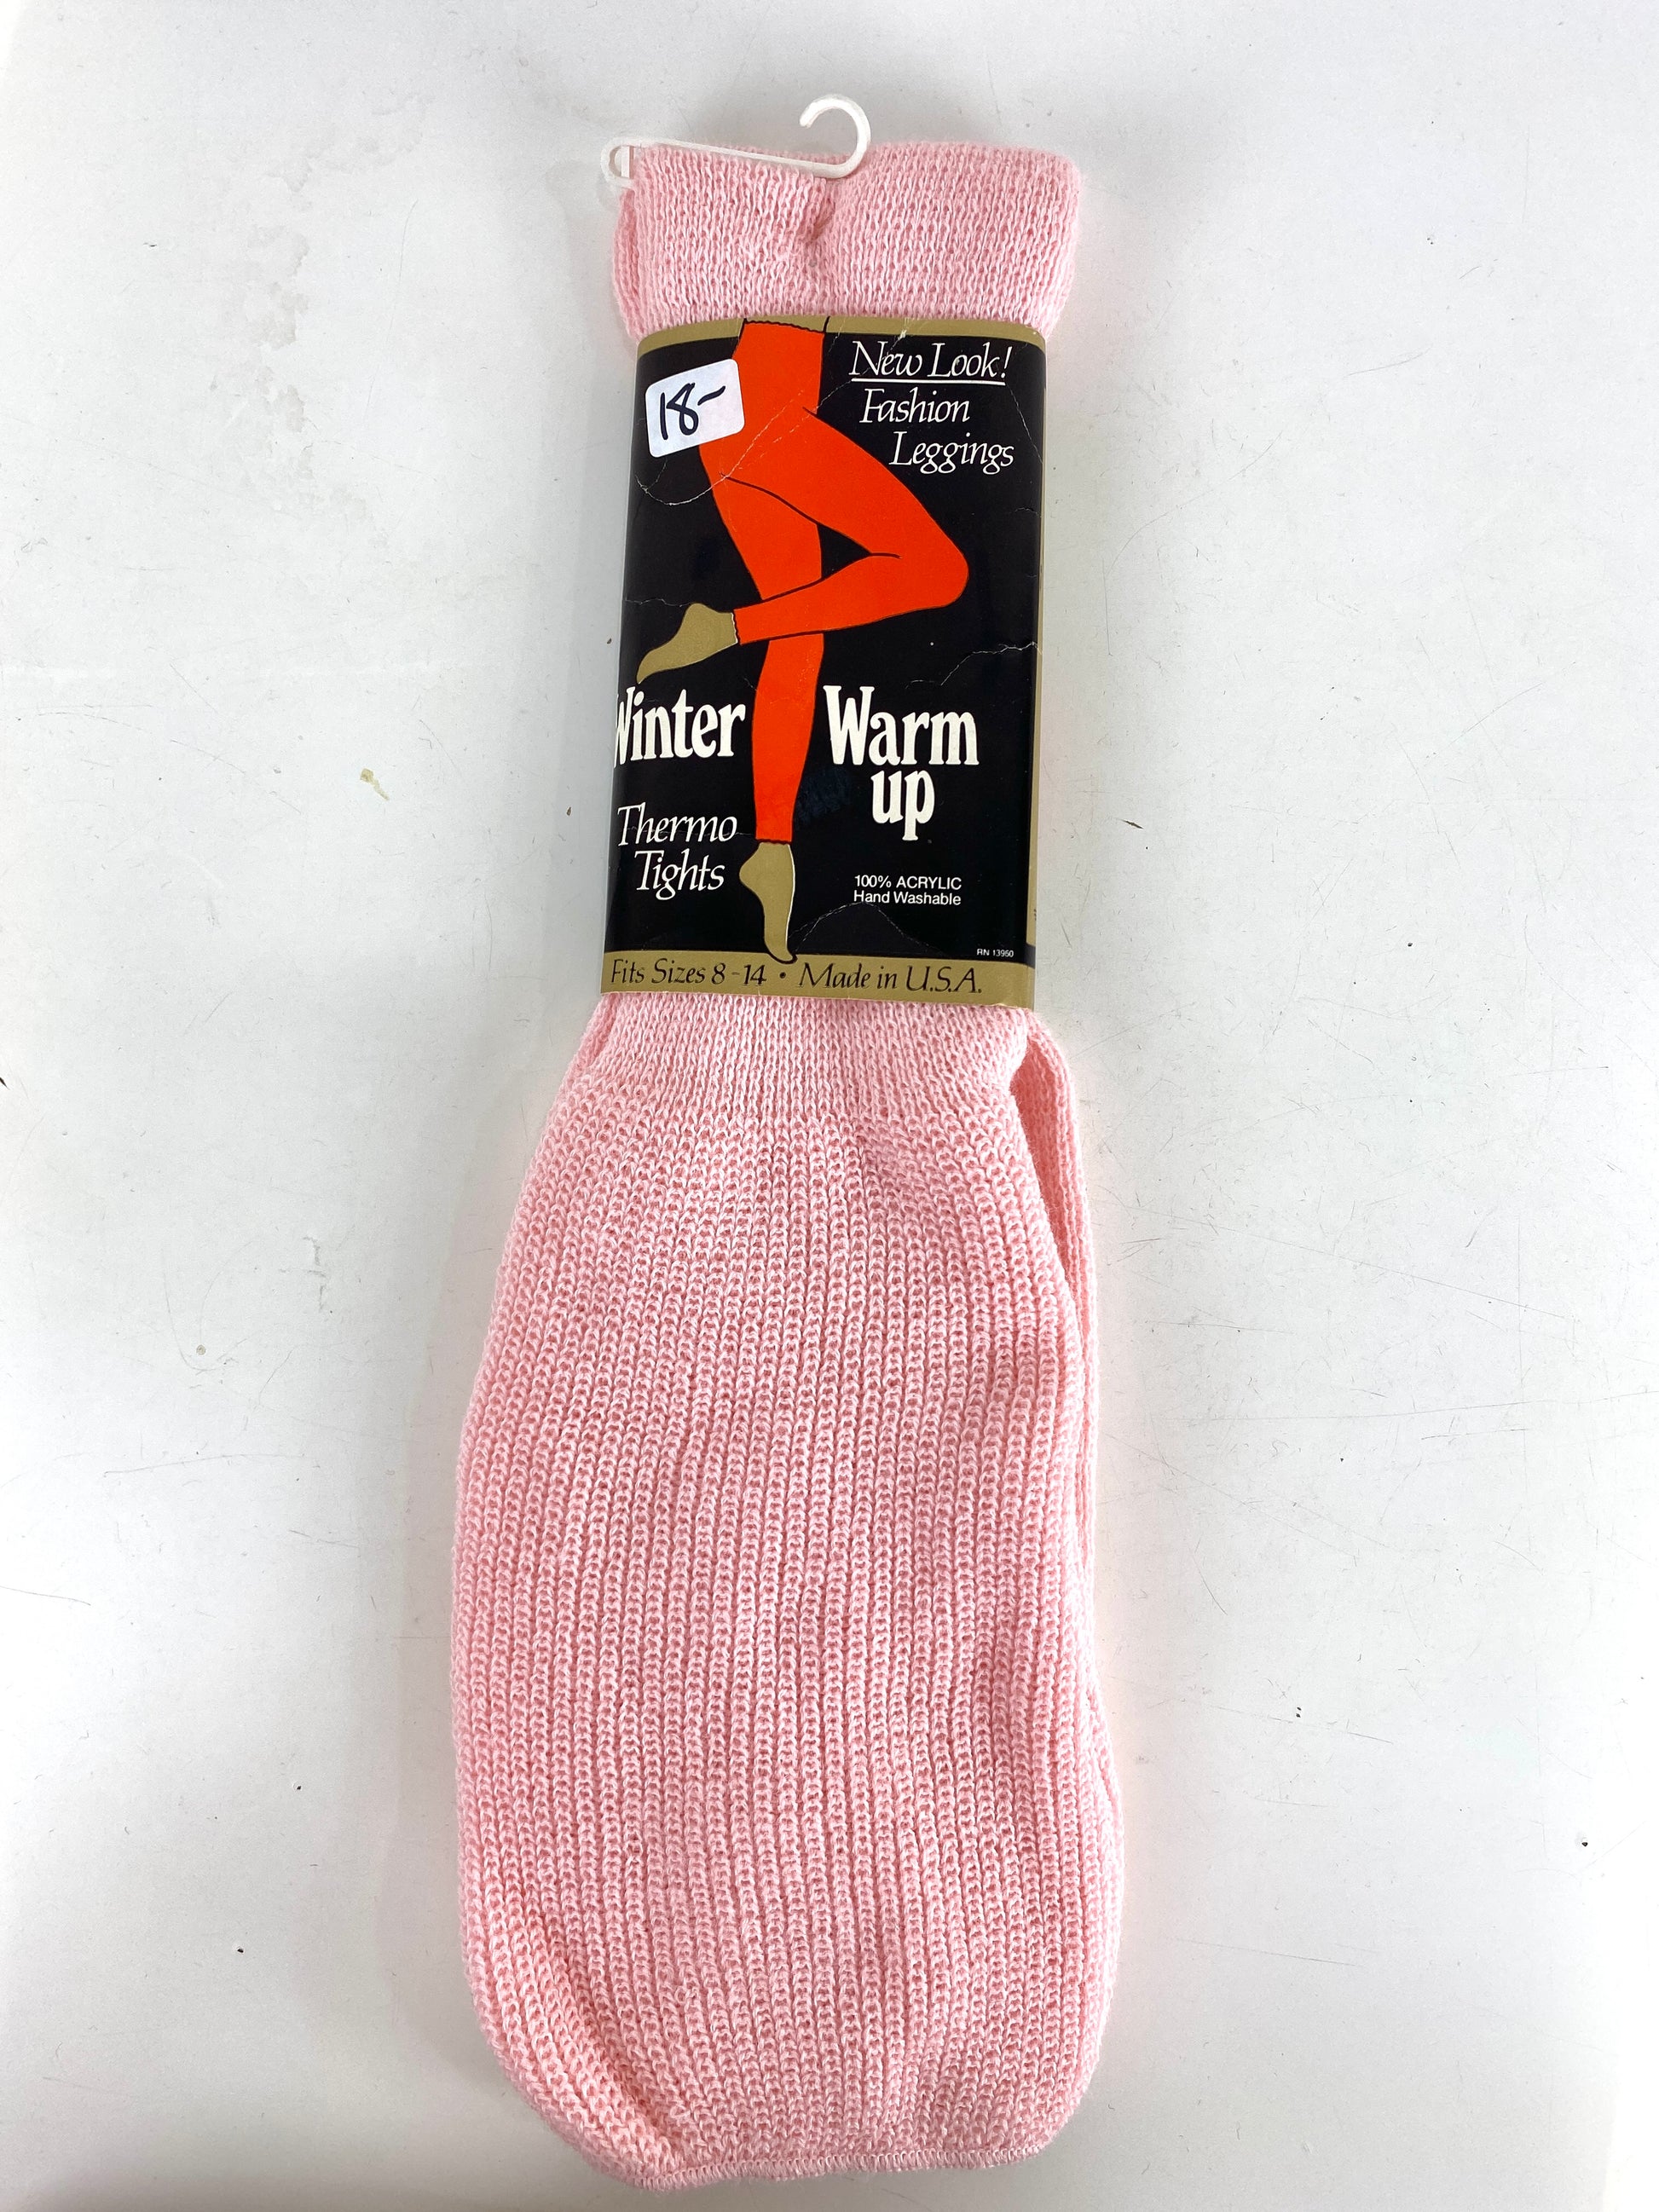 1980s Vintage Deadstock Winter Warm-Up Thermo Tights, Footless Red Knit Fashion Leggings, NOS